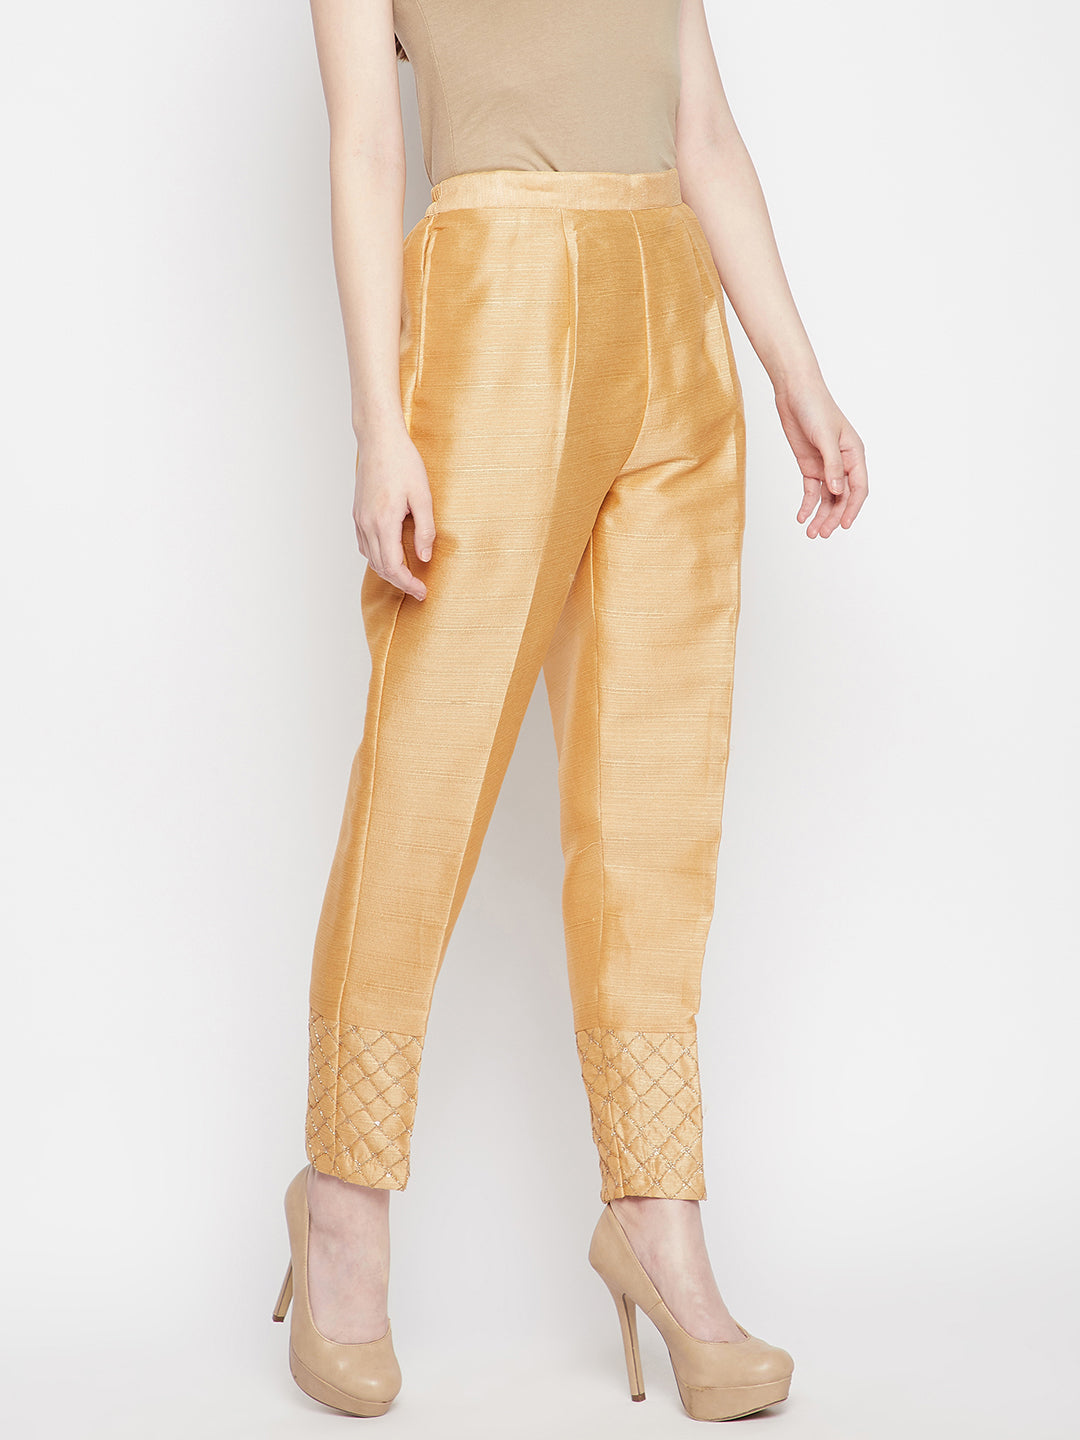 Vintage 1950s 60s Gold Lamé Outfit High Waist Cigarette Pants and Cropped  Top Pinup Gold Small - Etsy